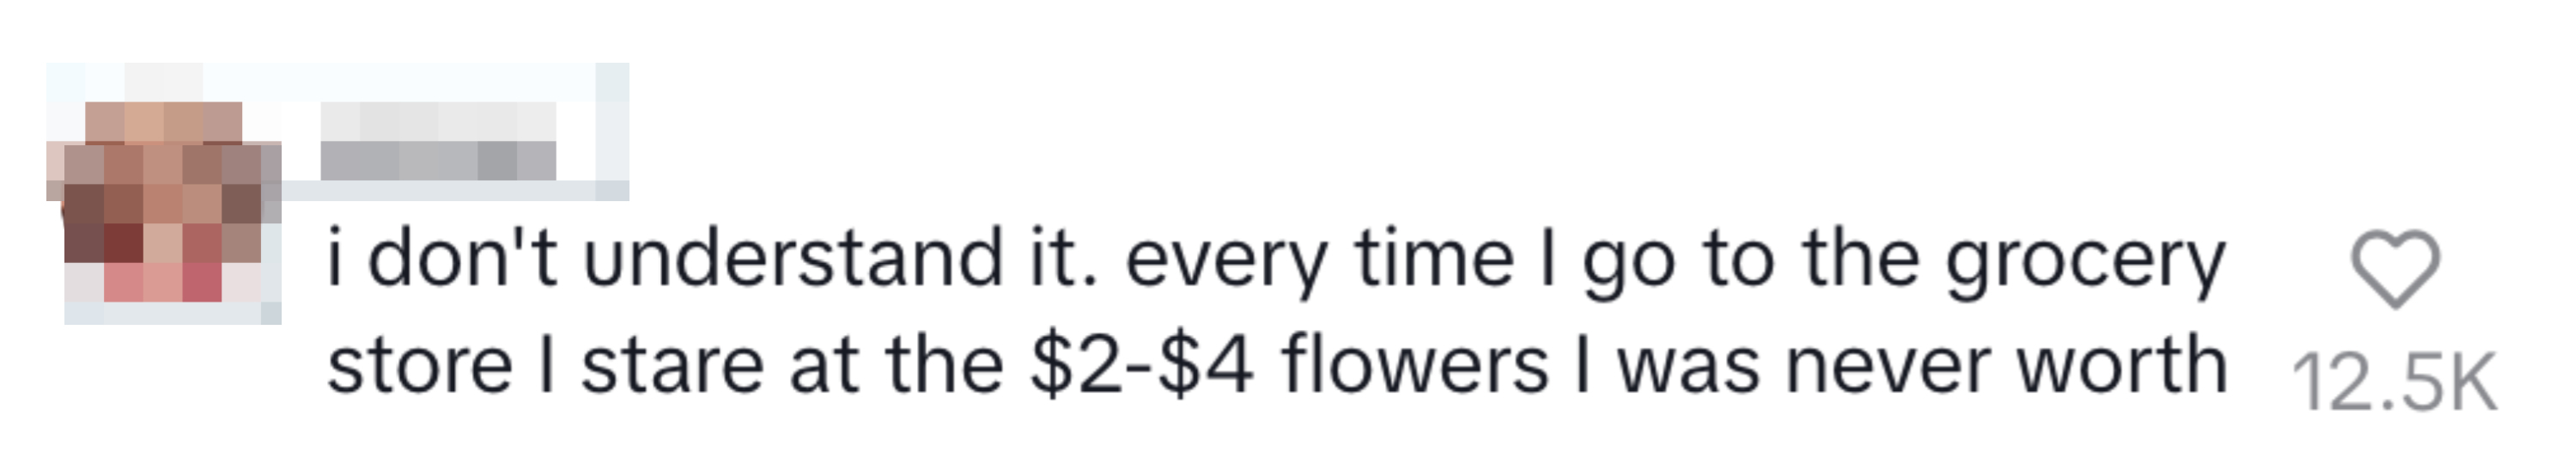 The image is a screenshot of a social media post by a user named minnie, expressing confusion about her own self-worth compared to low-cost grocery store flowers, with a heart symbol and 2.5K likes